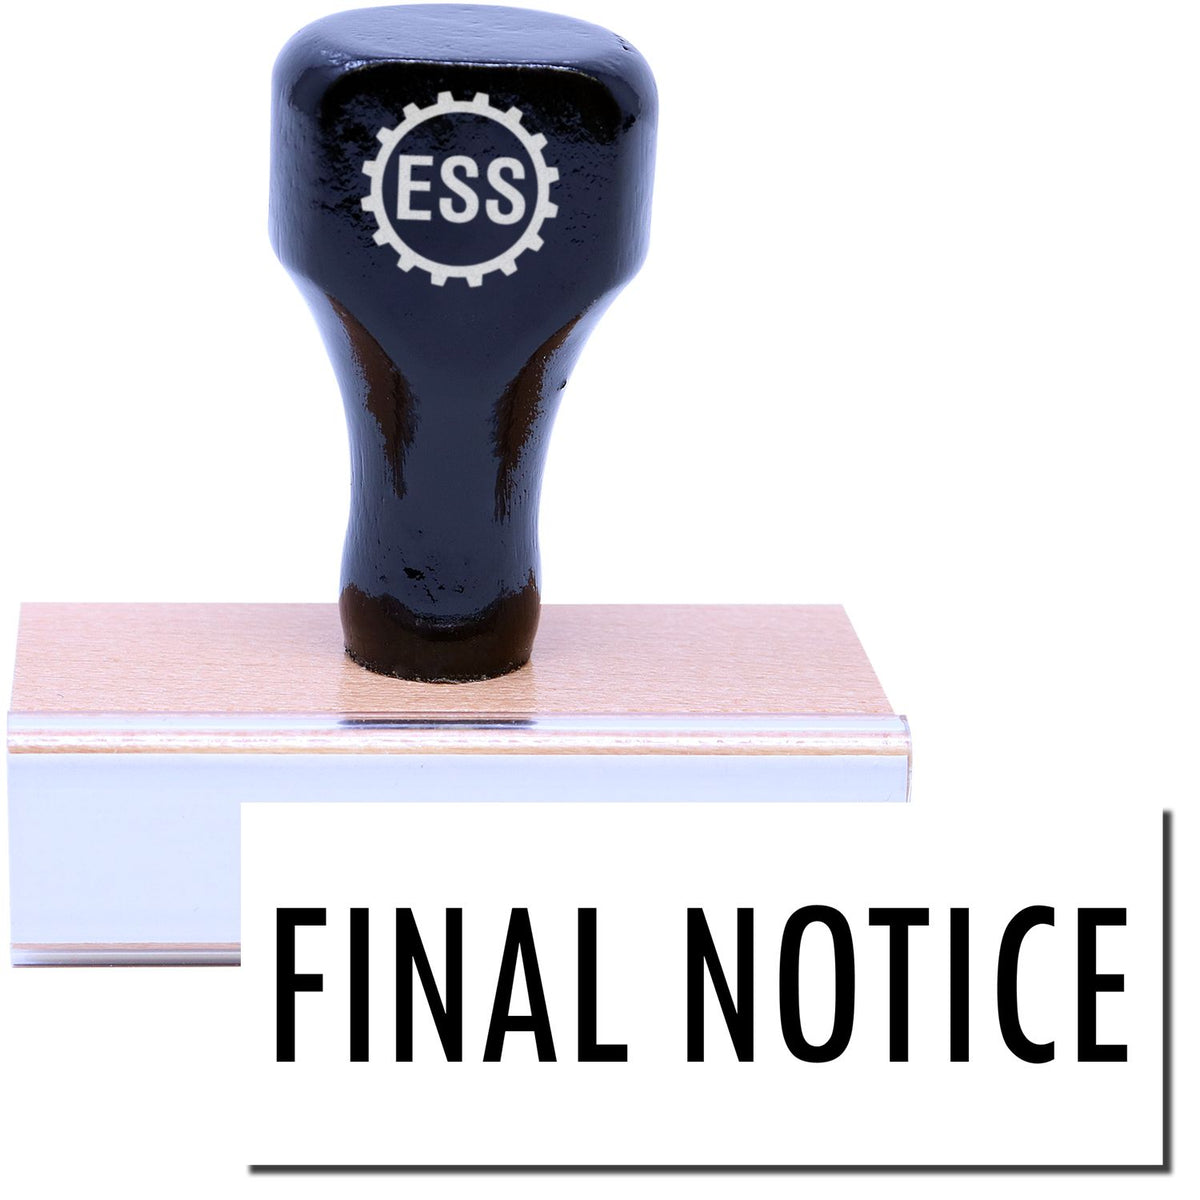 A stock office rubber stamp with a stamped image showing how the text &quot;FINAL NOTICE&quot; is displayed after stamping.